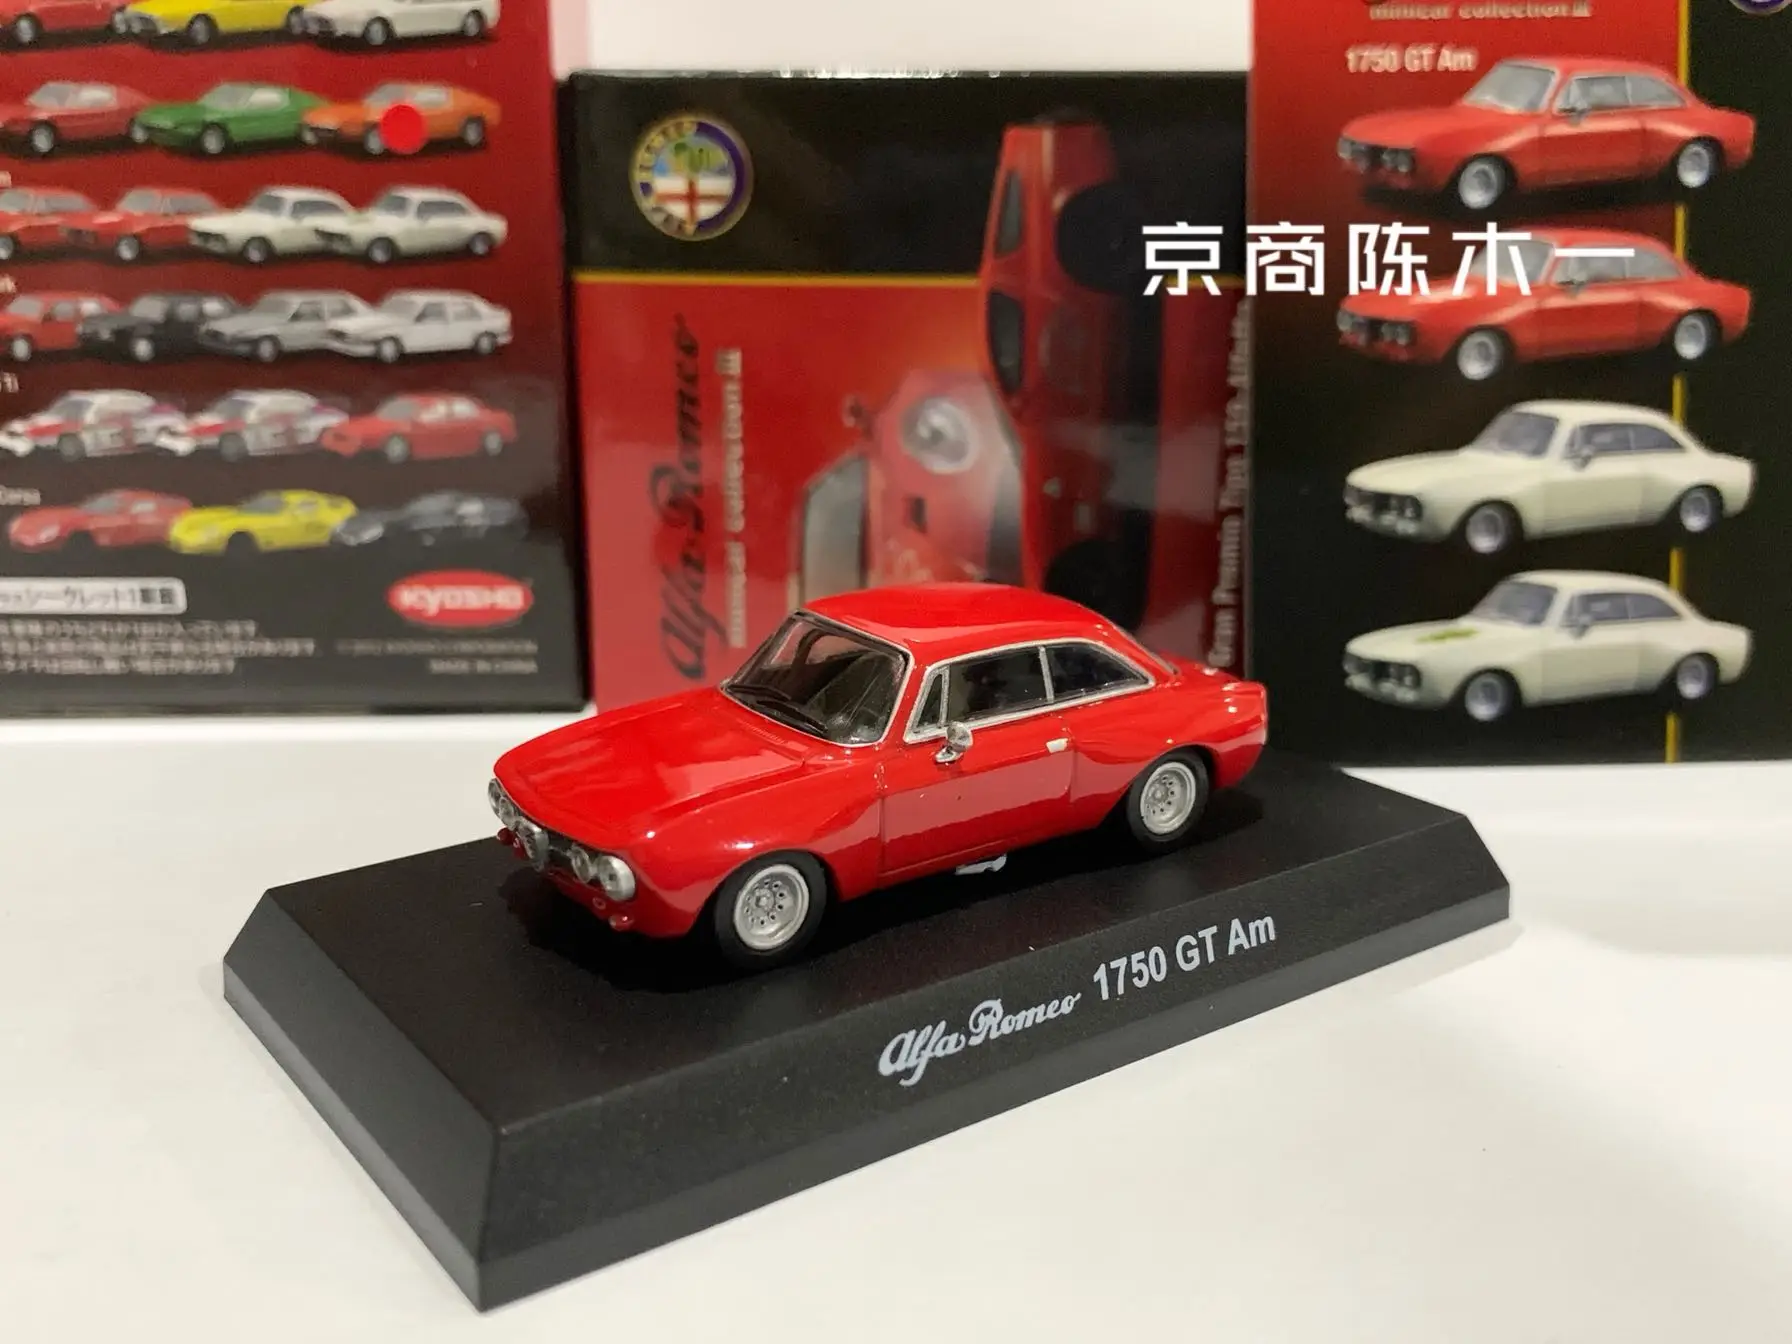 1-64-kyosho-alfa-romeo-1750-gt-am-lm-f1-racing-collection-of-die-cast-alloy-car-decoration-model-toys